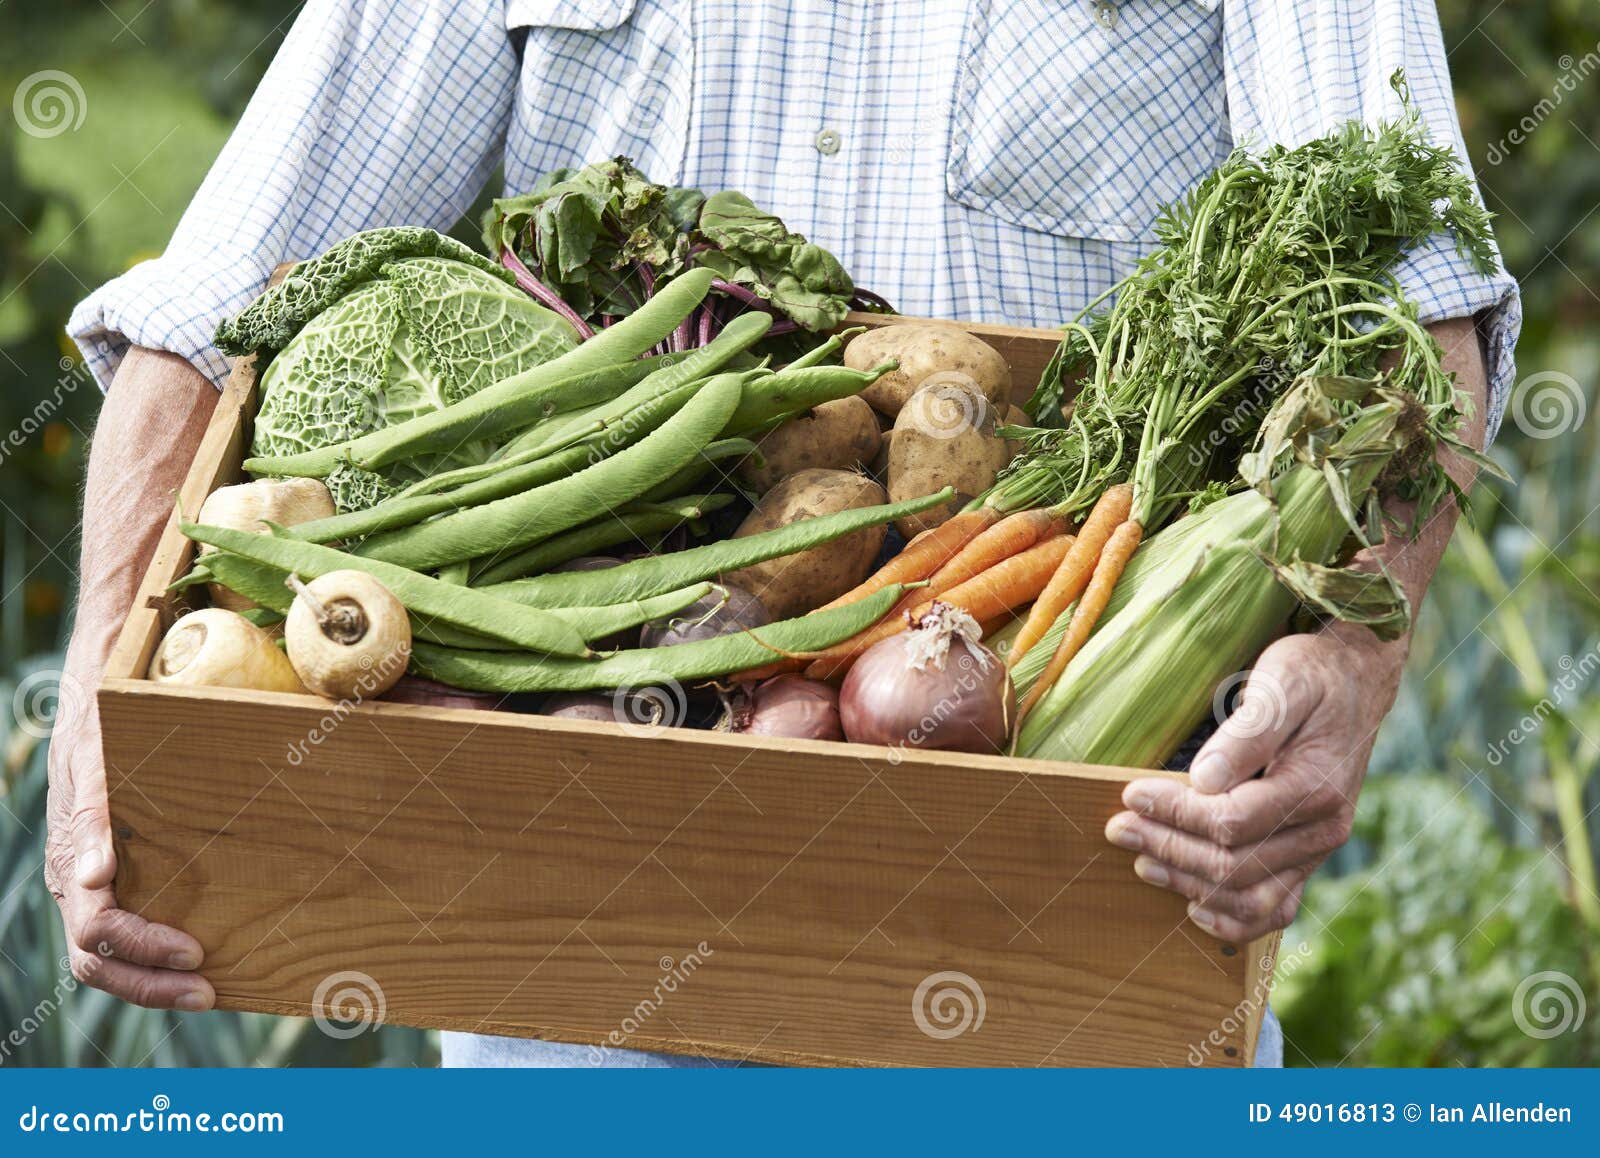 close up of man on allotment with box of home grown vegetables